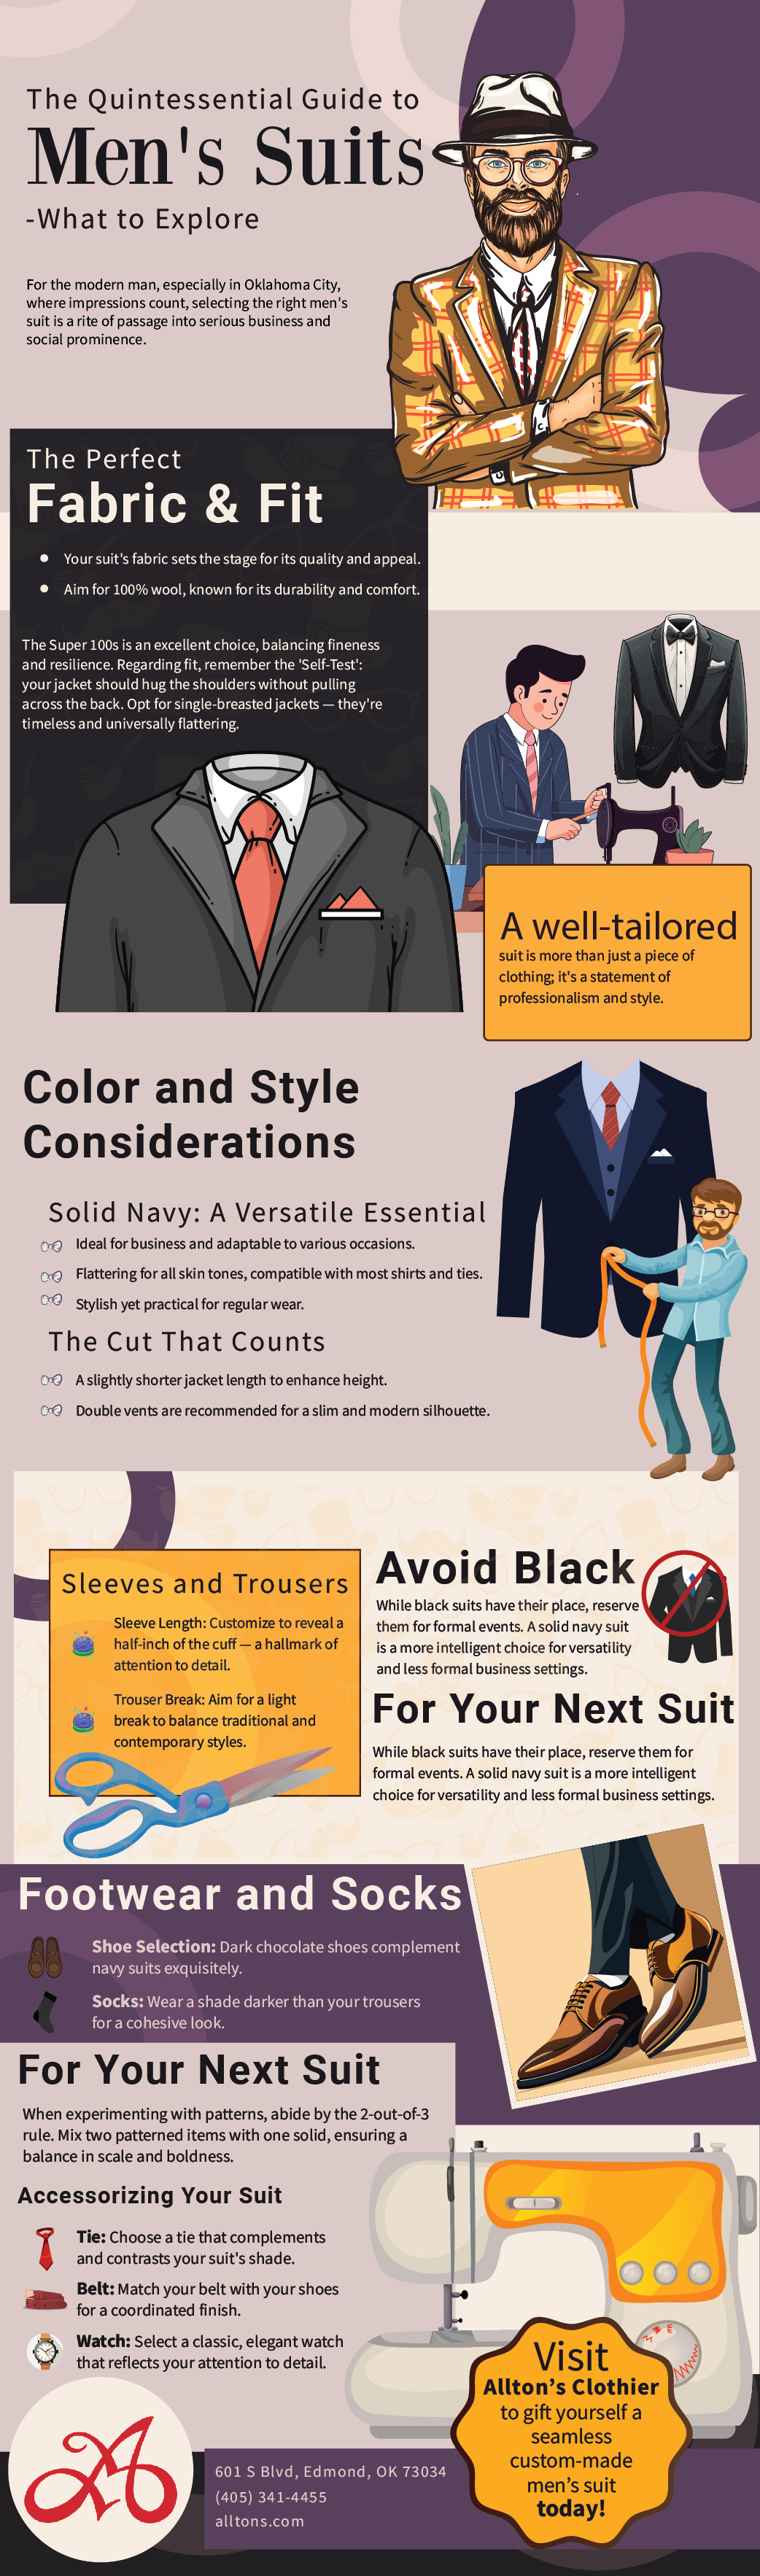 The quintessential Guide To Men's Suits - What To Expect